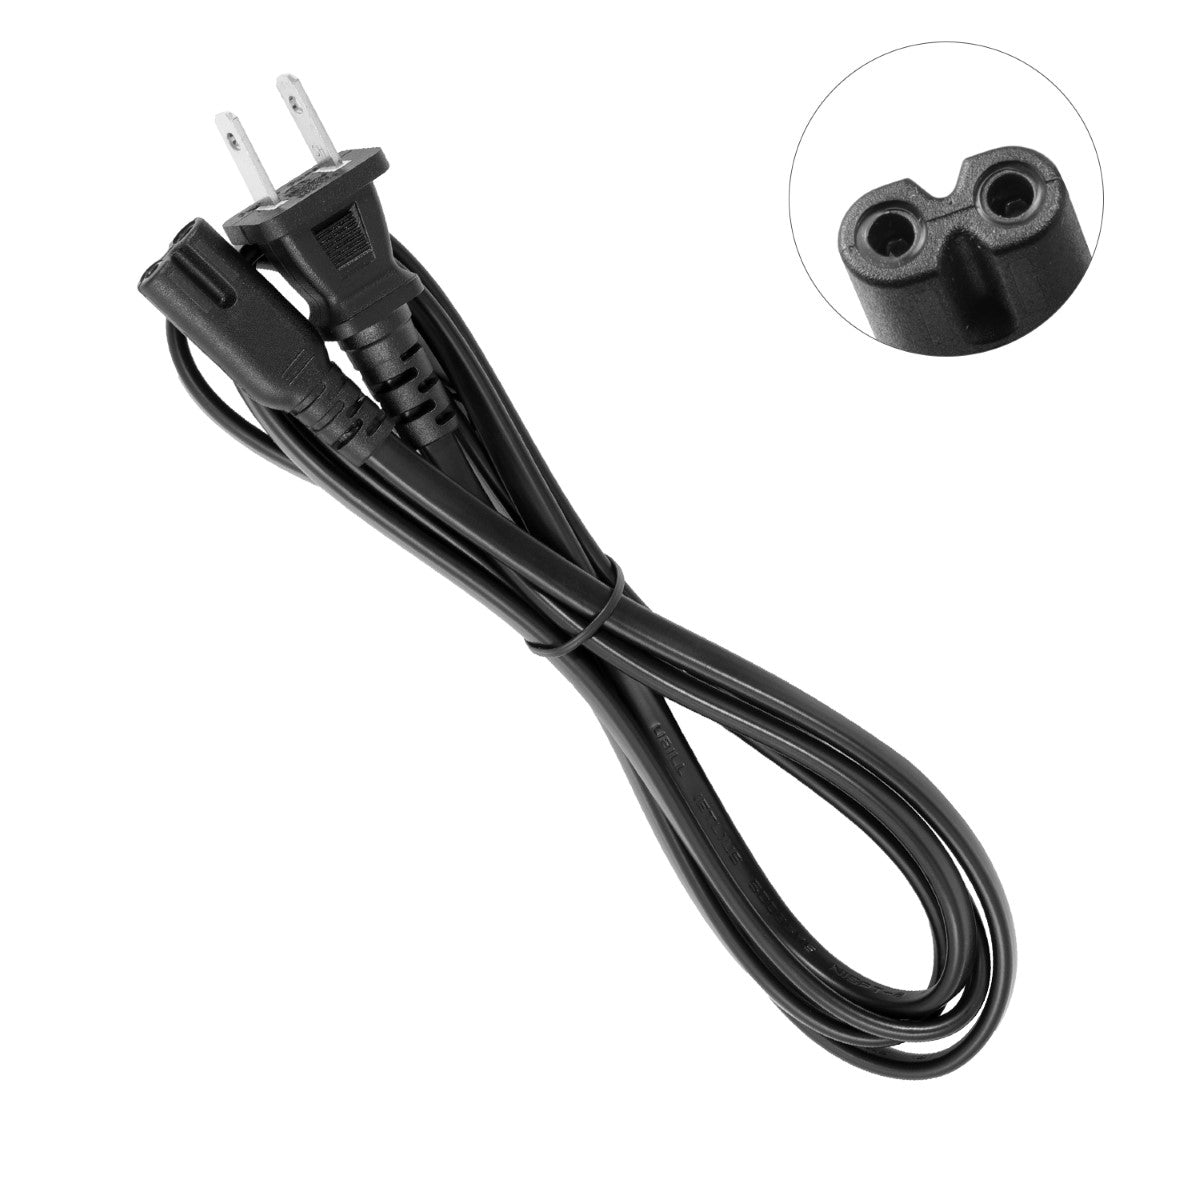 Power Cable for HP OfficeJet Pro 9010 All-in-One Printer.